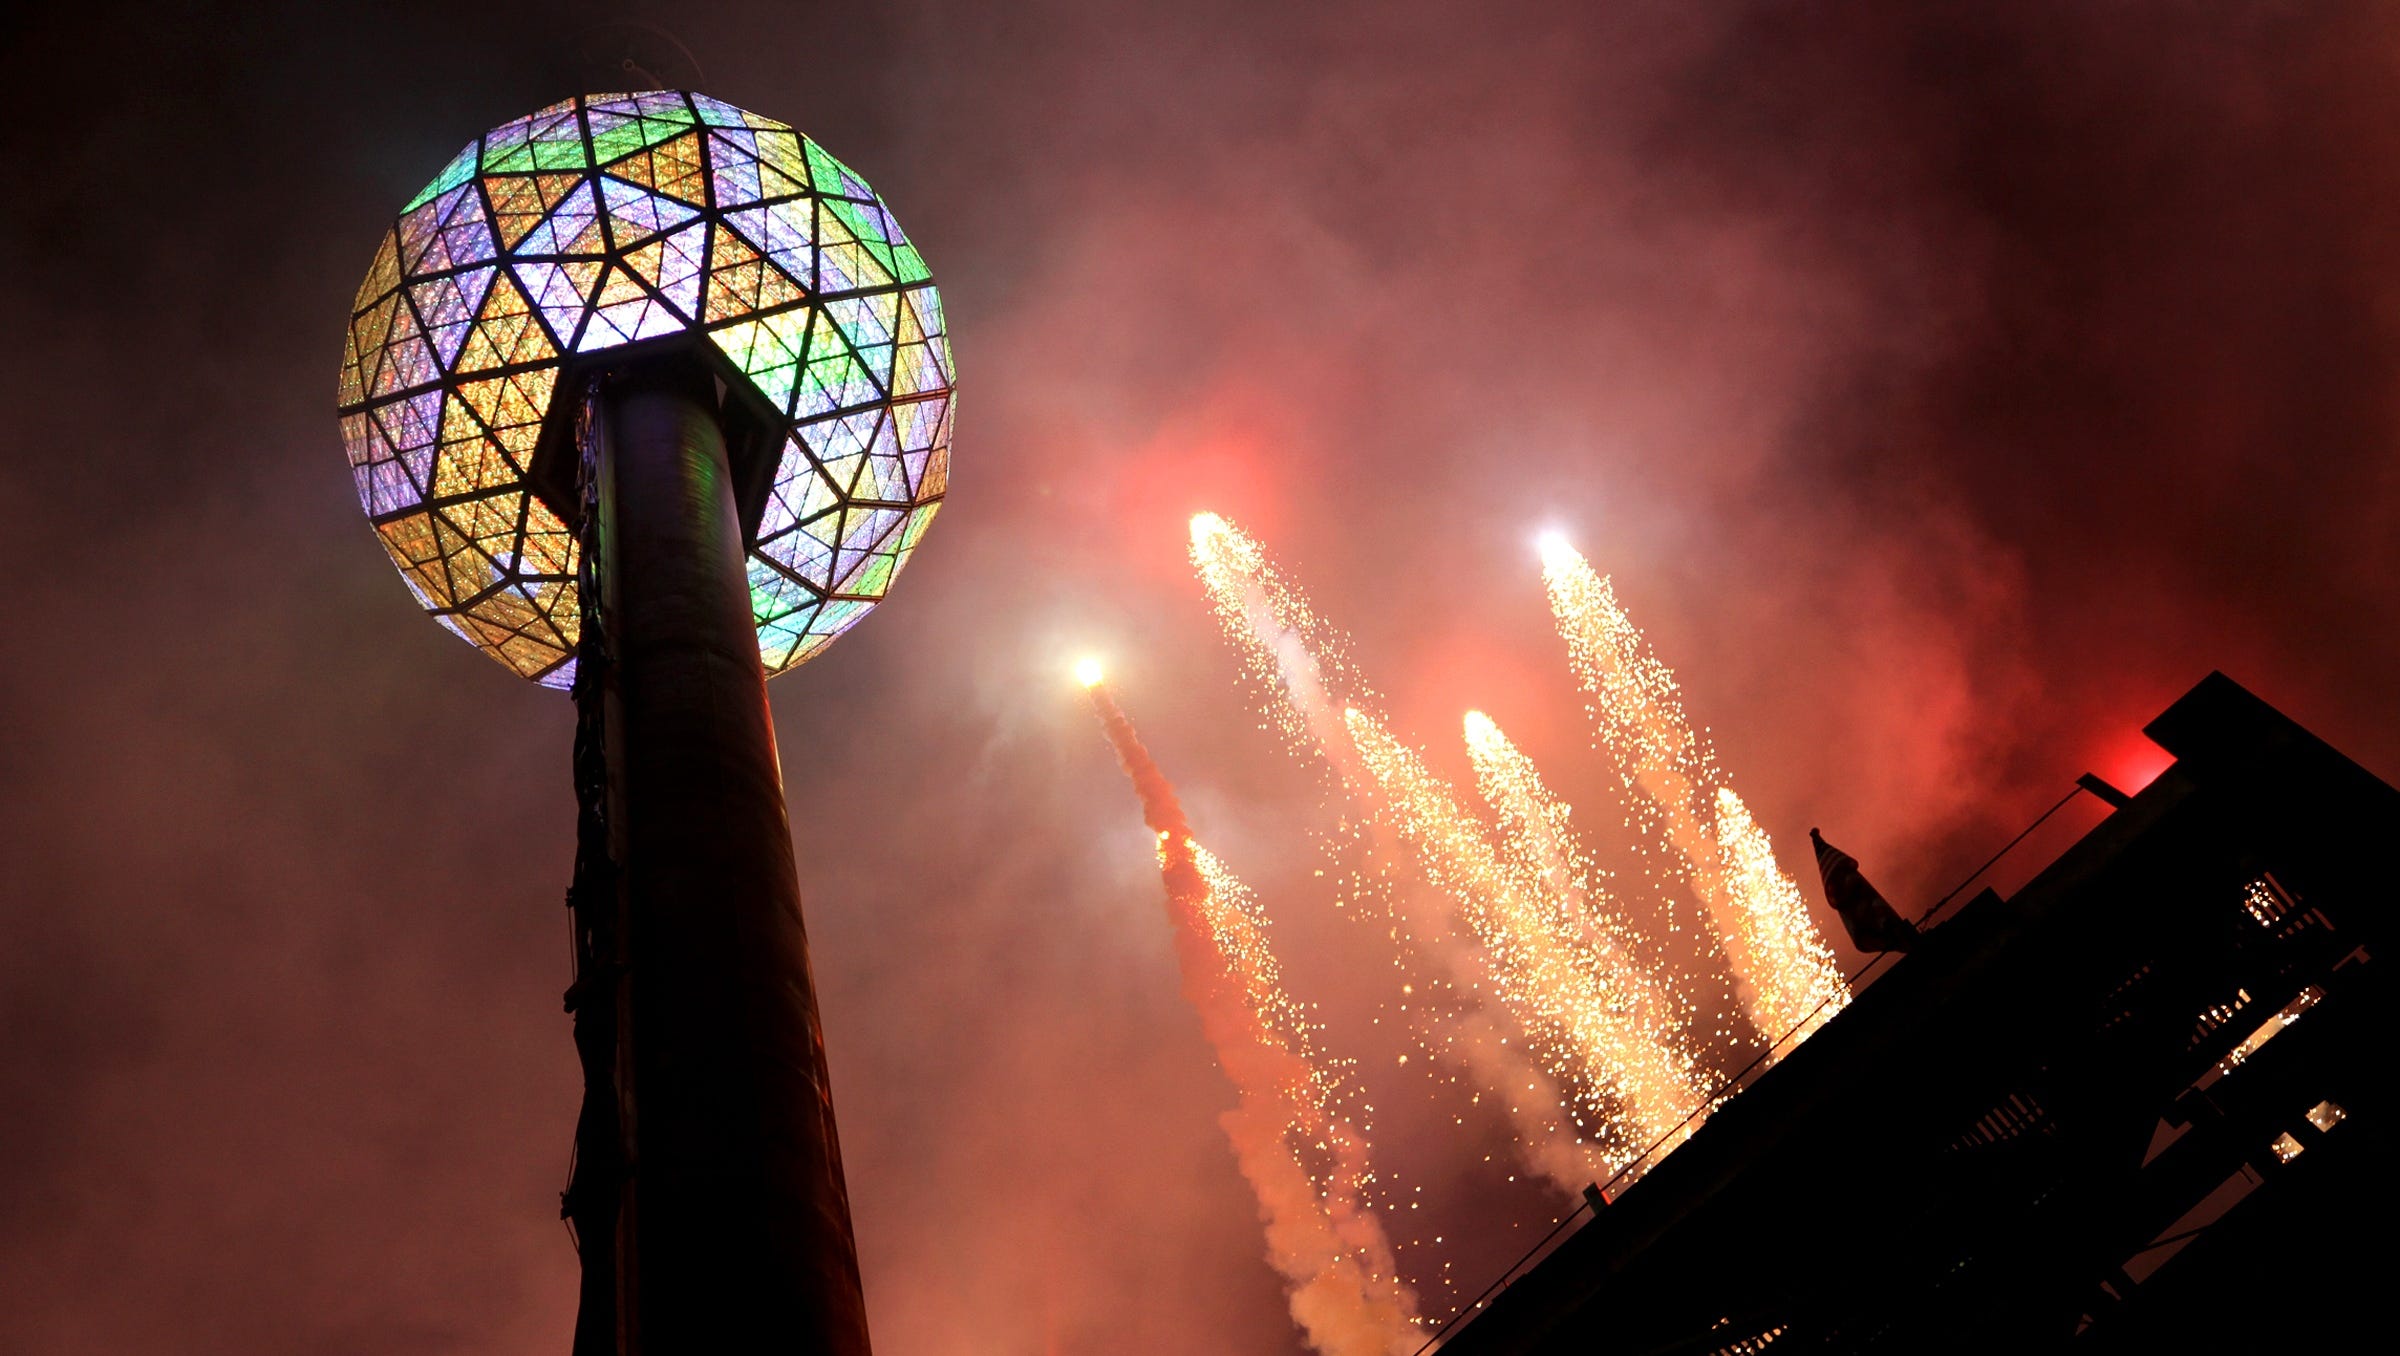 Where can you watch the ball drop on 2019?